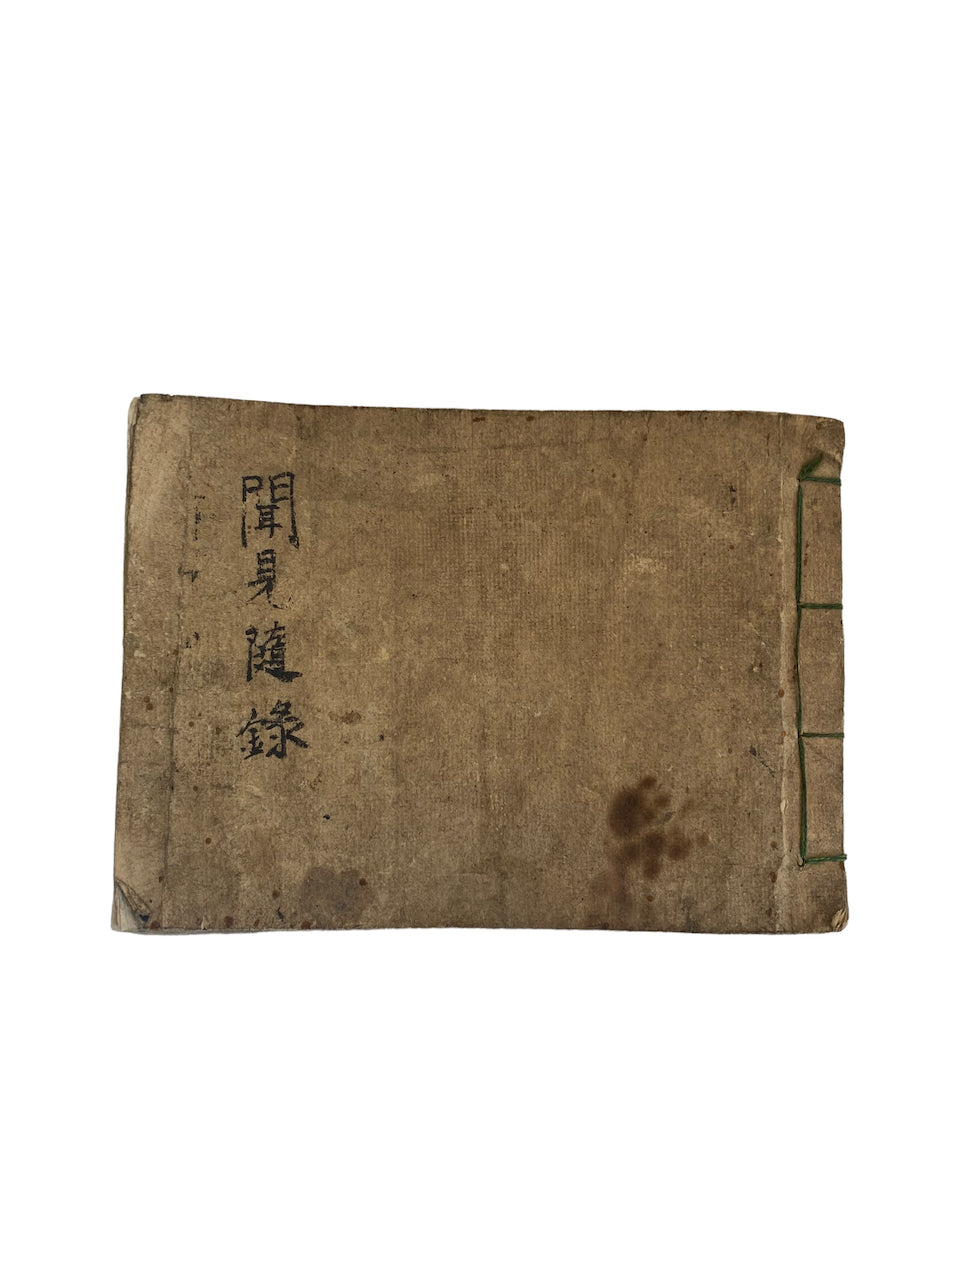 A book recording what was seen and heard in Japan between the Edo and Meiji periods.